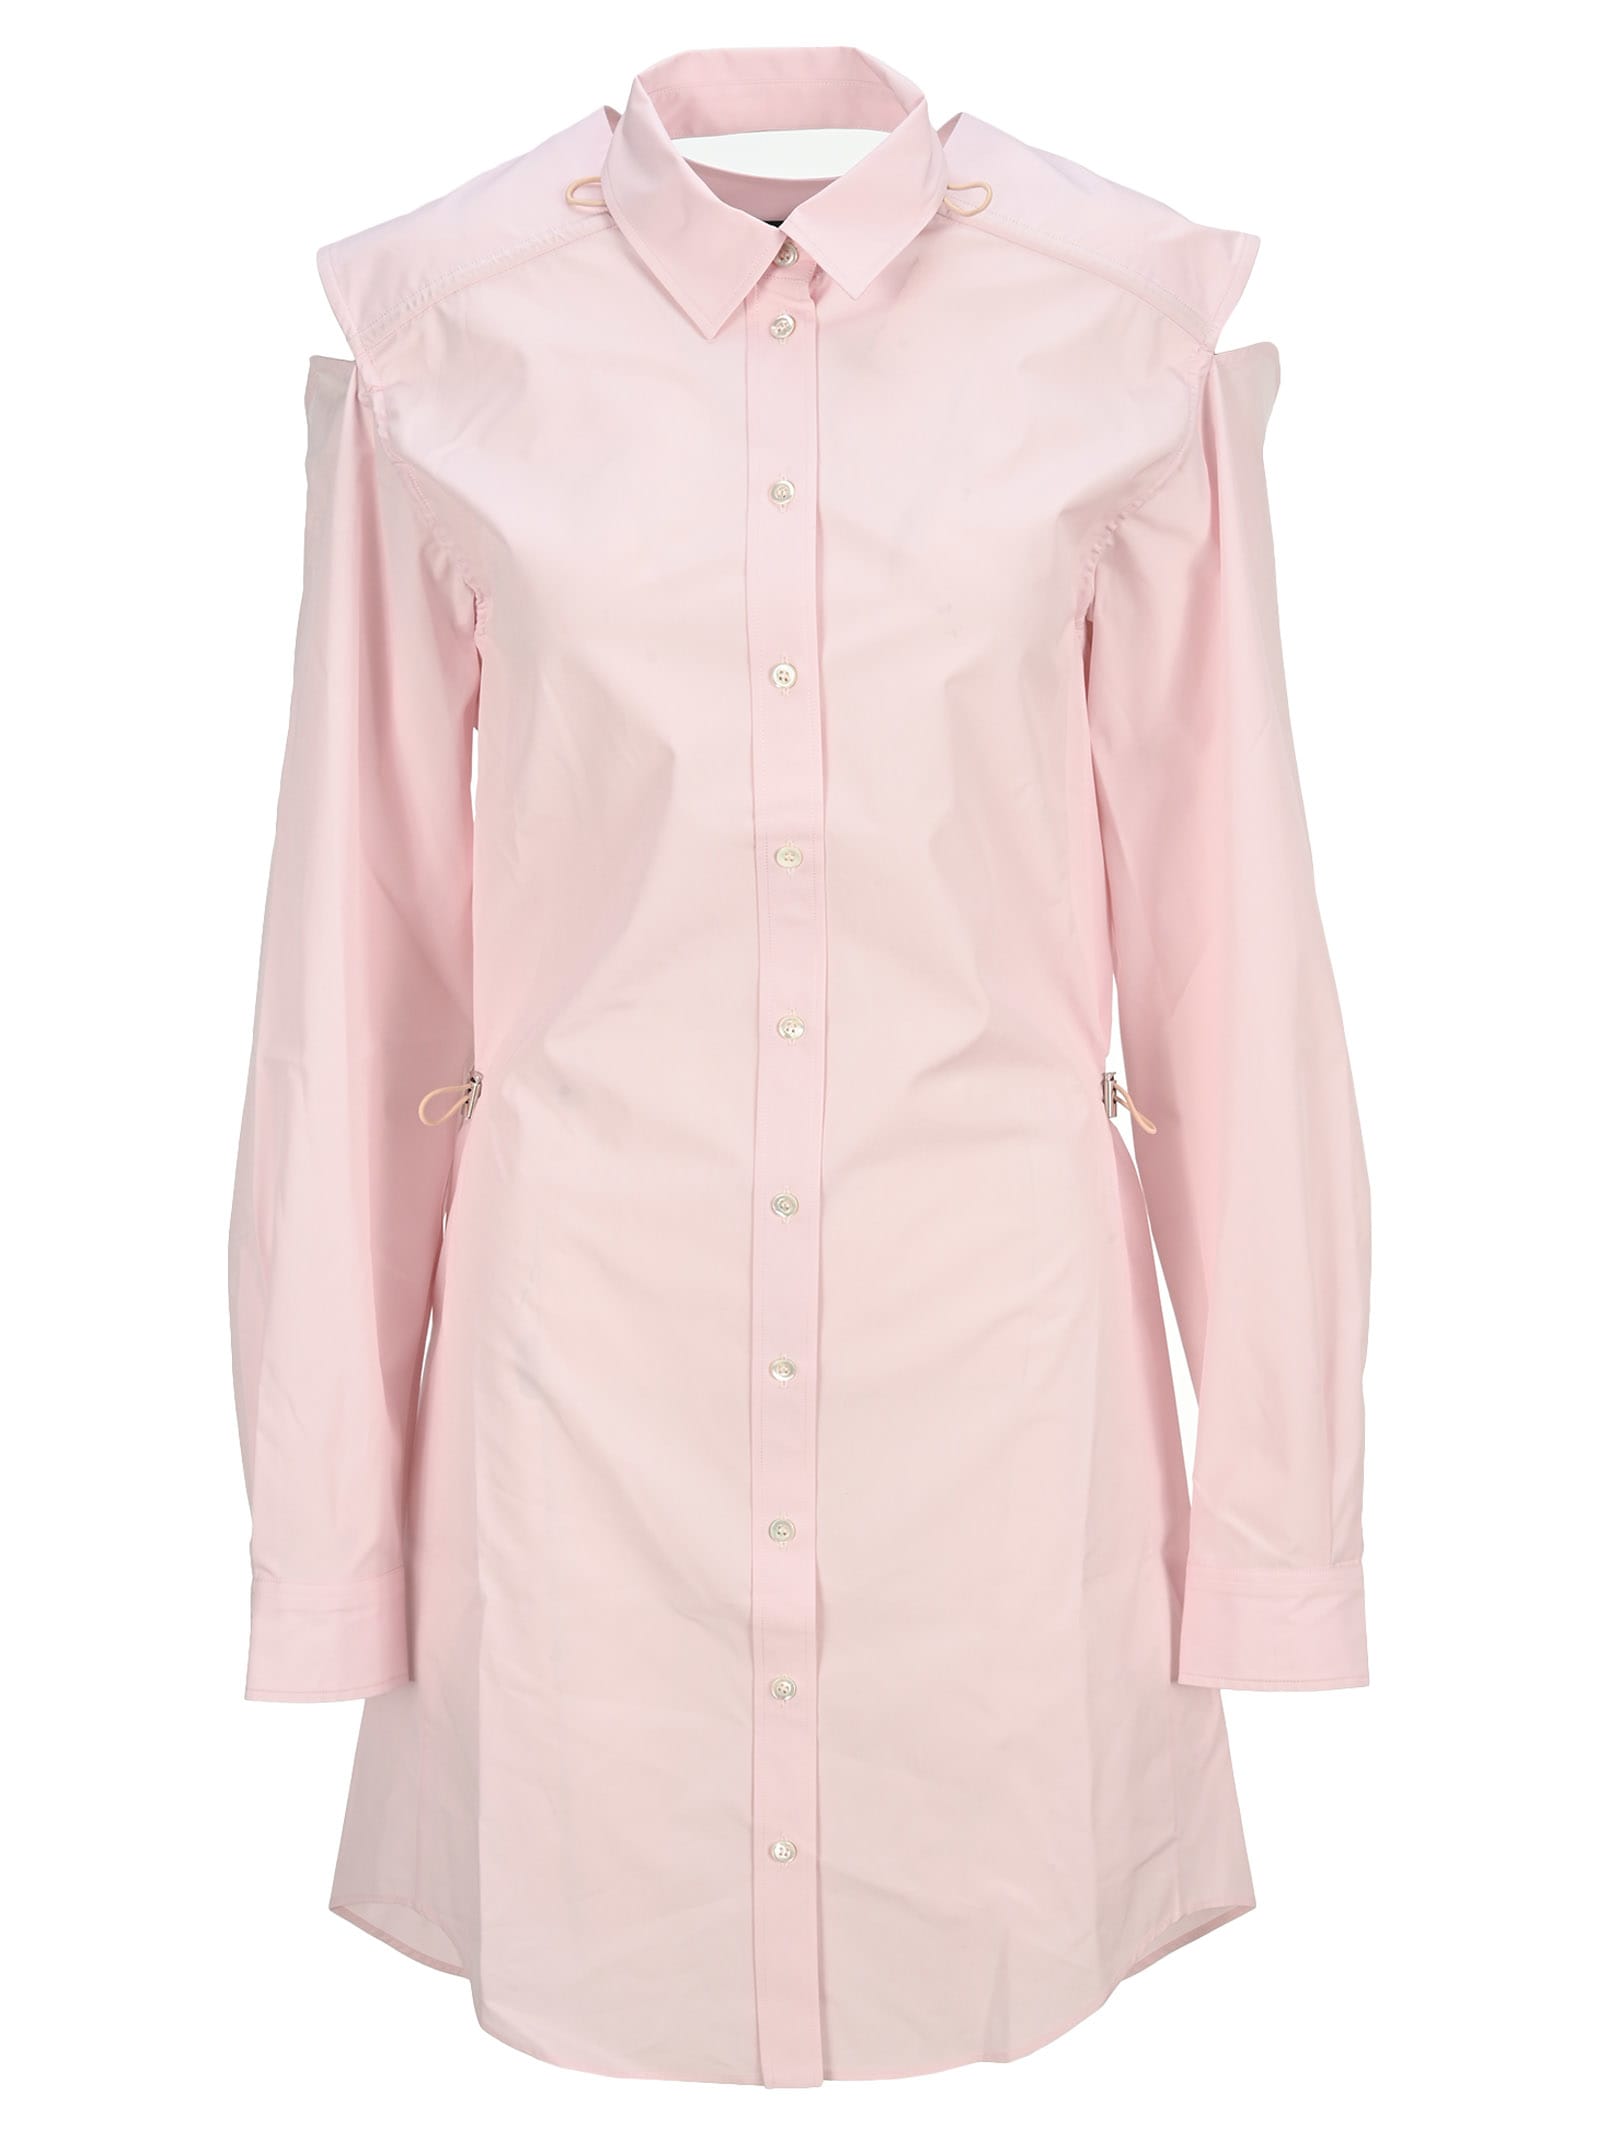 Y/project Convertible Shirt Dress